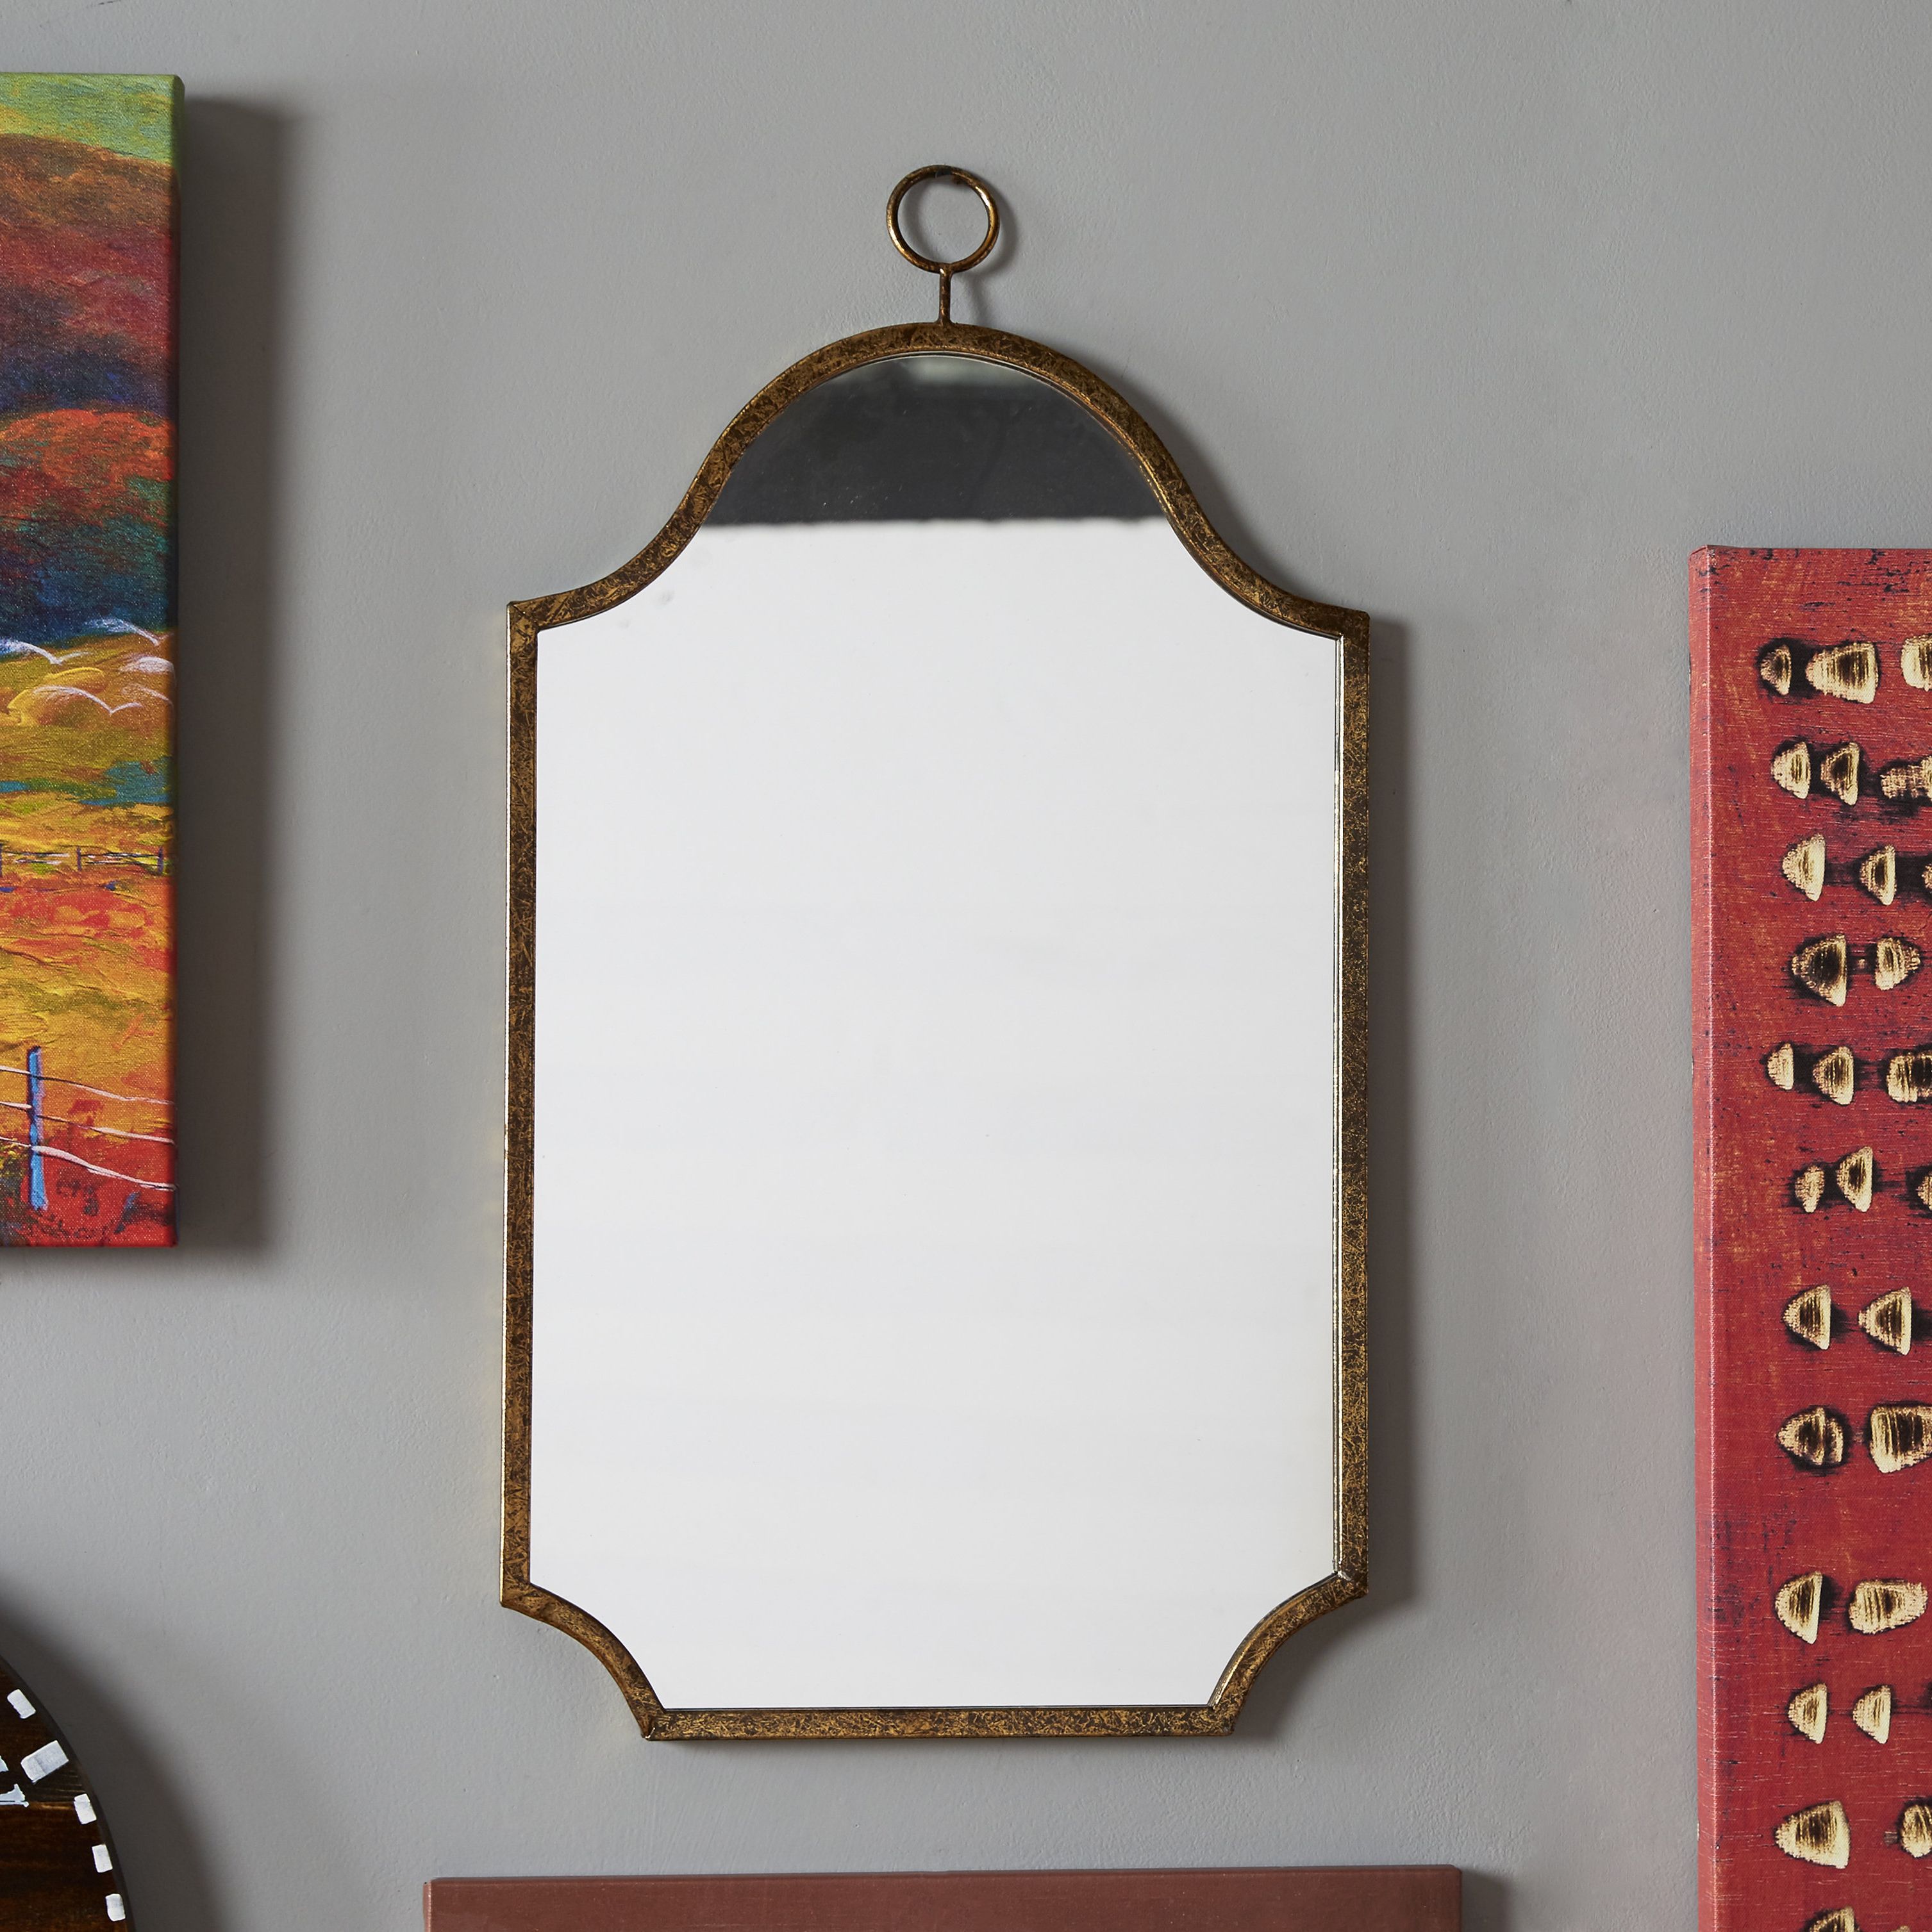 Cuadra Traditional Accent Mirror Regarding Well Known Bristol Accent Mirrors (View 10 of 20)